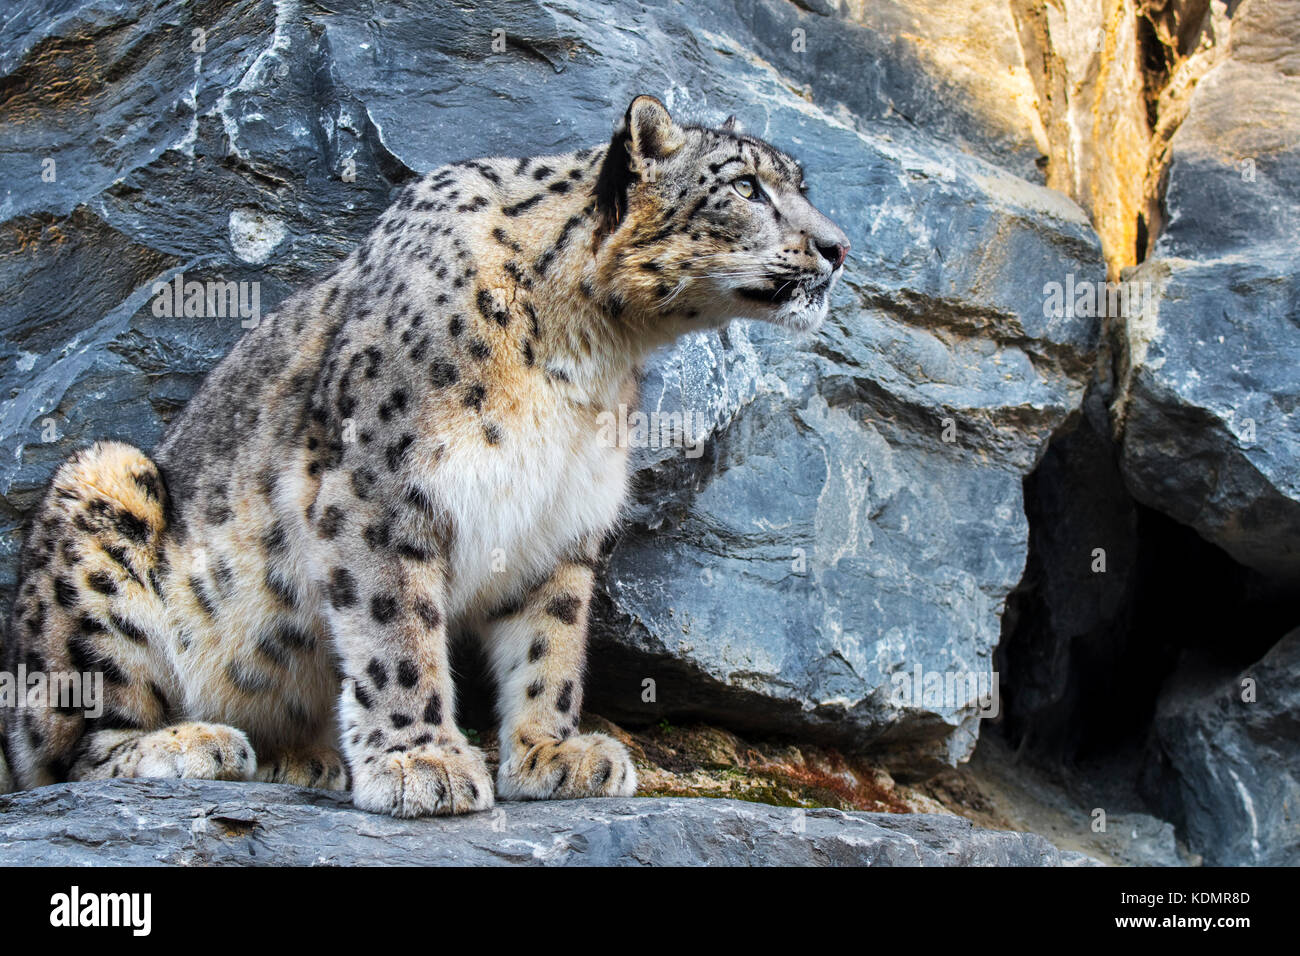 Snow leopard / ounce (Panthera uncia / Uncia uncia) looking for prey from rock ledge in cliff face, native to the mountain ranges of Asia Stock Photo